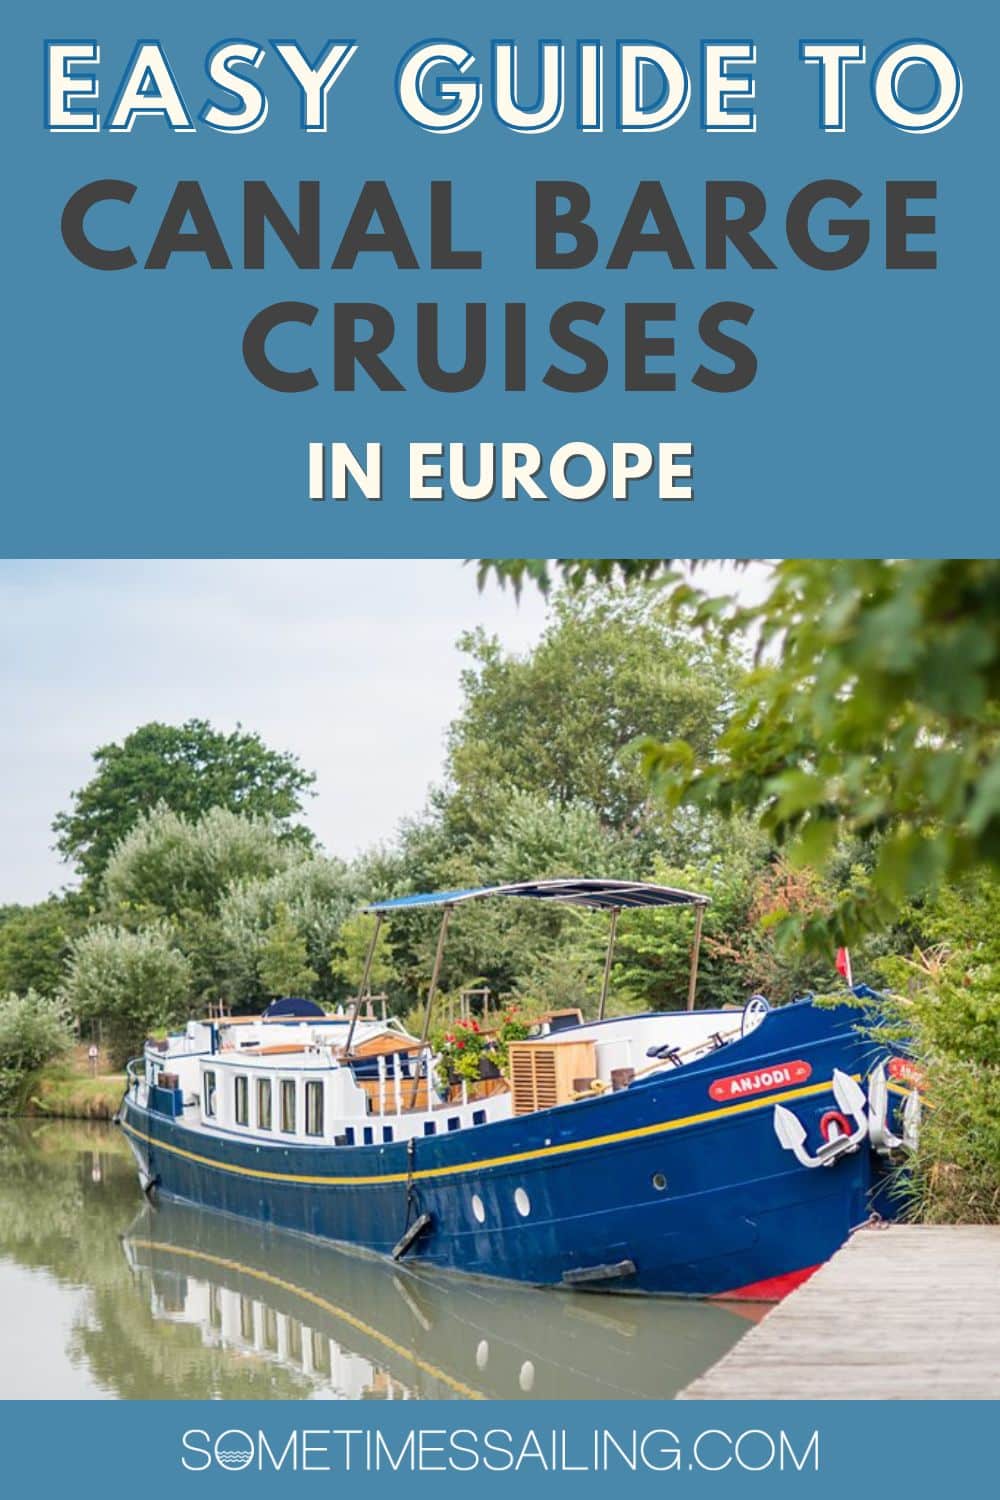 Easy Guide to Canal Barge Cruises in Europe, with a picture of the luxury barge hotel cruise ship